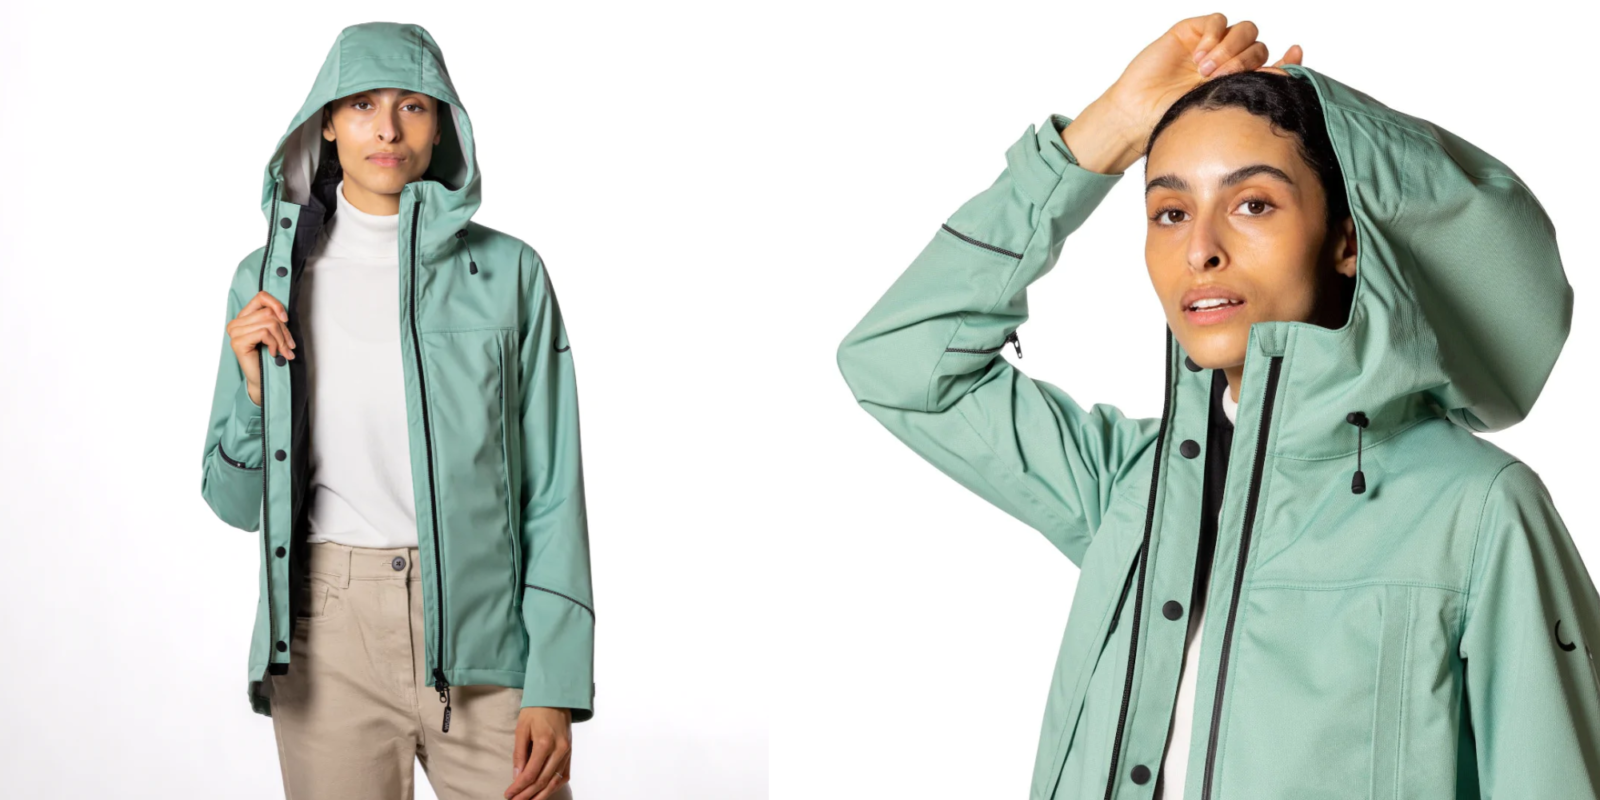 Stay Dry in Style With These 9 More Sustainable Rain Jackets - Good On You